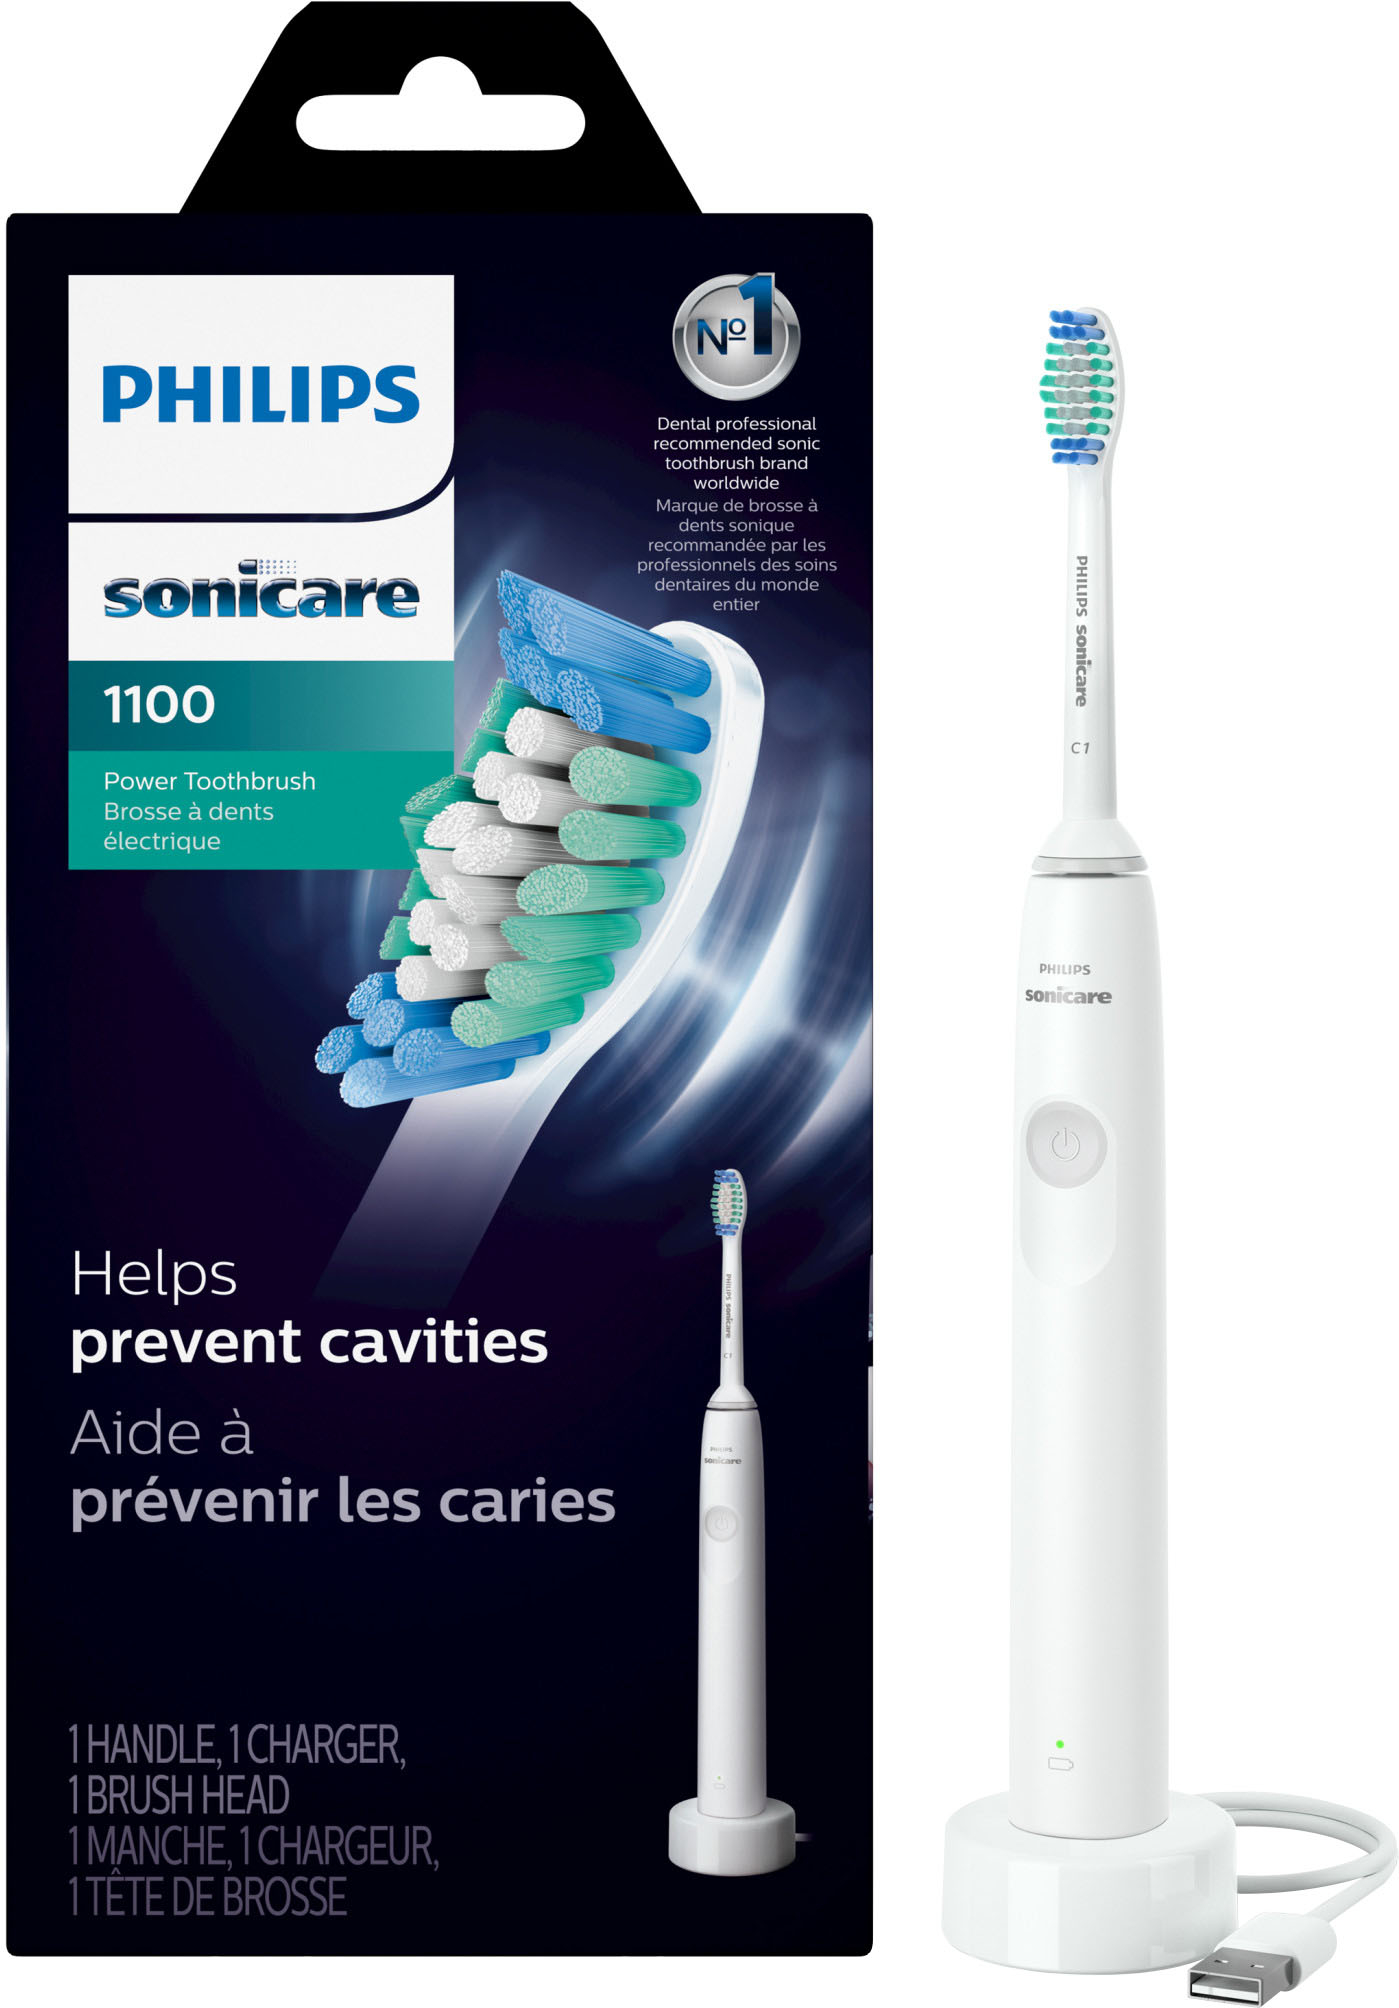 Philips Sonicare 1100 Power Toothbrush, Rechargeable Electric Toothbrush  White Grey HX3641/02 - Best Buy